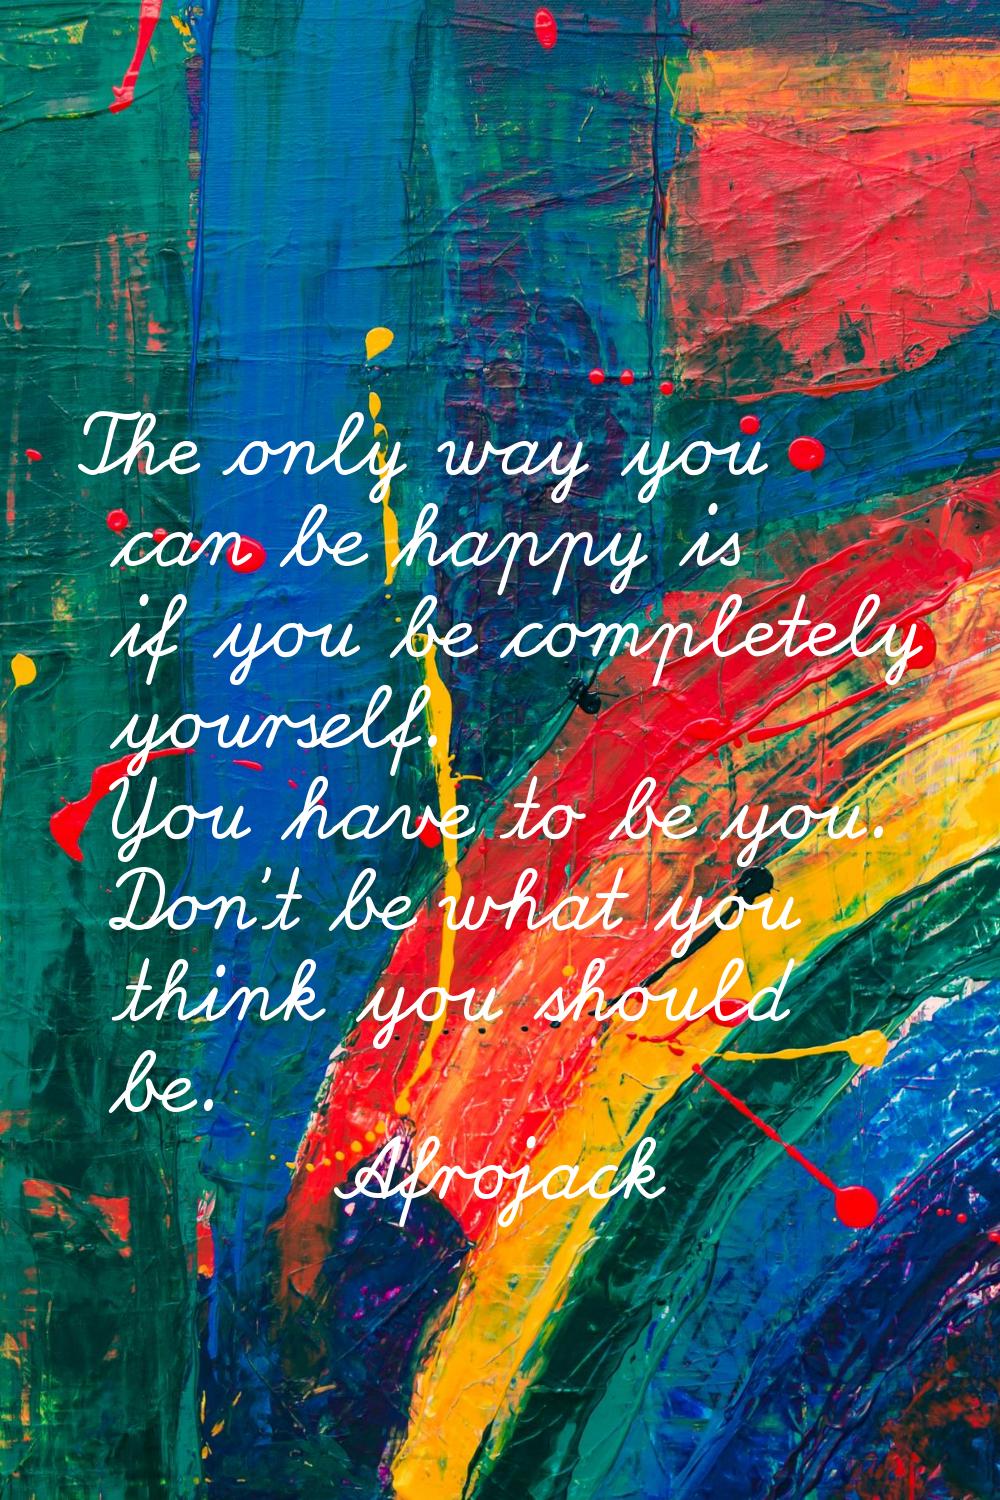 The only way you can be happy is if you be completely yourself. You have to be you. Don't be what y